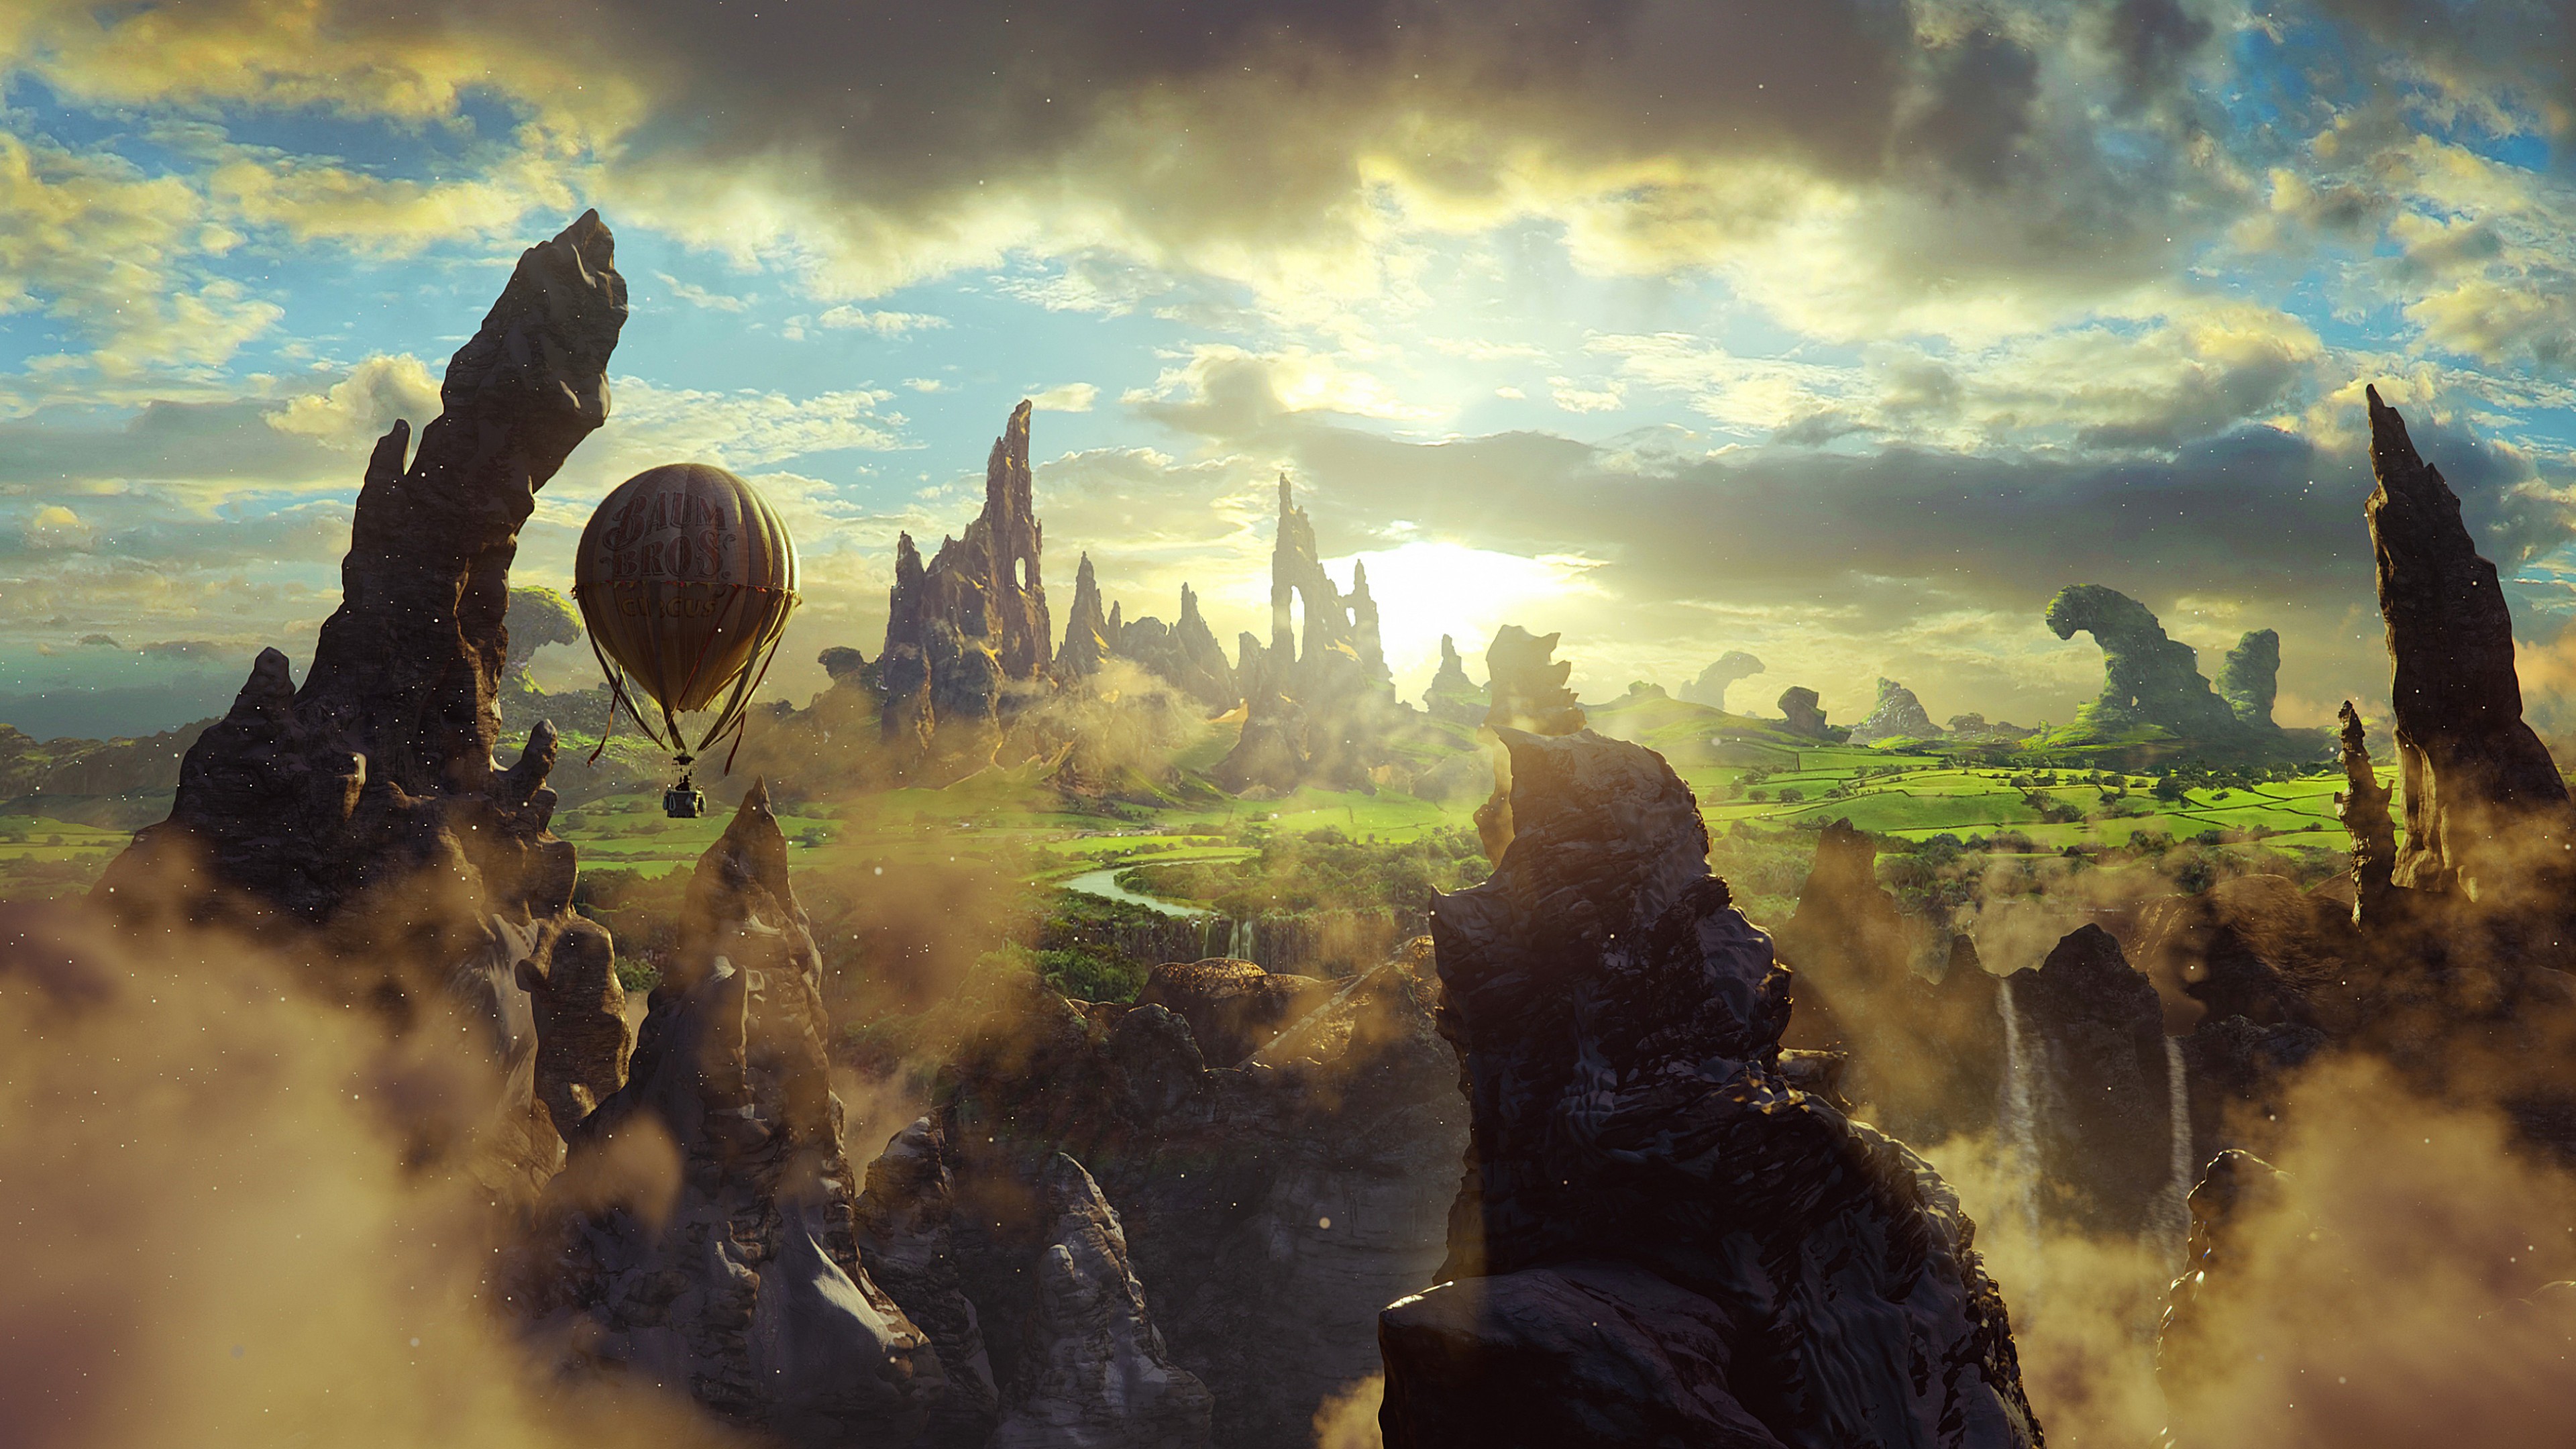 Wallpaper Oz: the Great and Powerful, 4k, 5k wallpaper, fantasy, cliffs